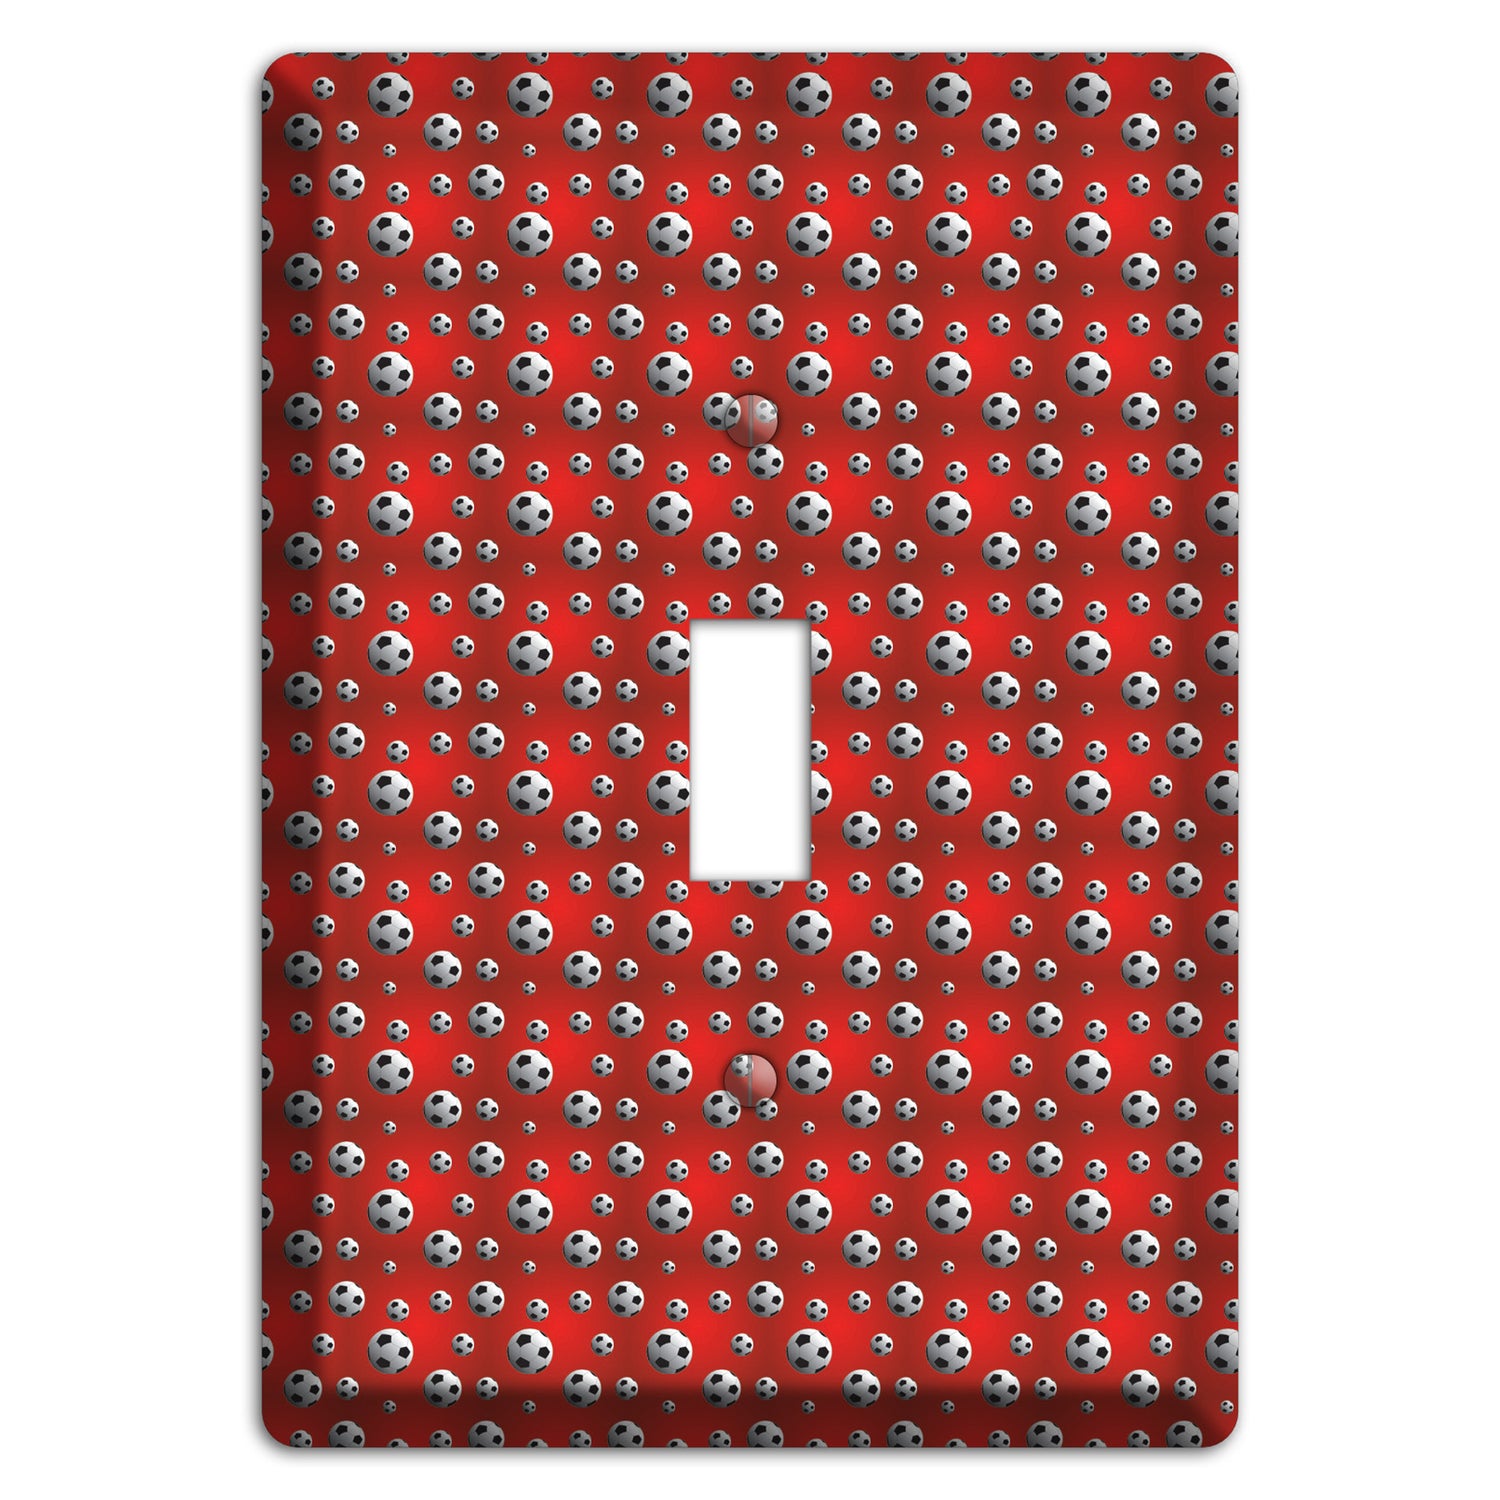 Red with Soccer Balls Cover Plates